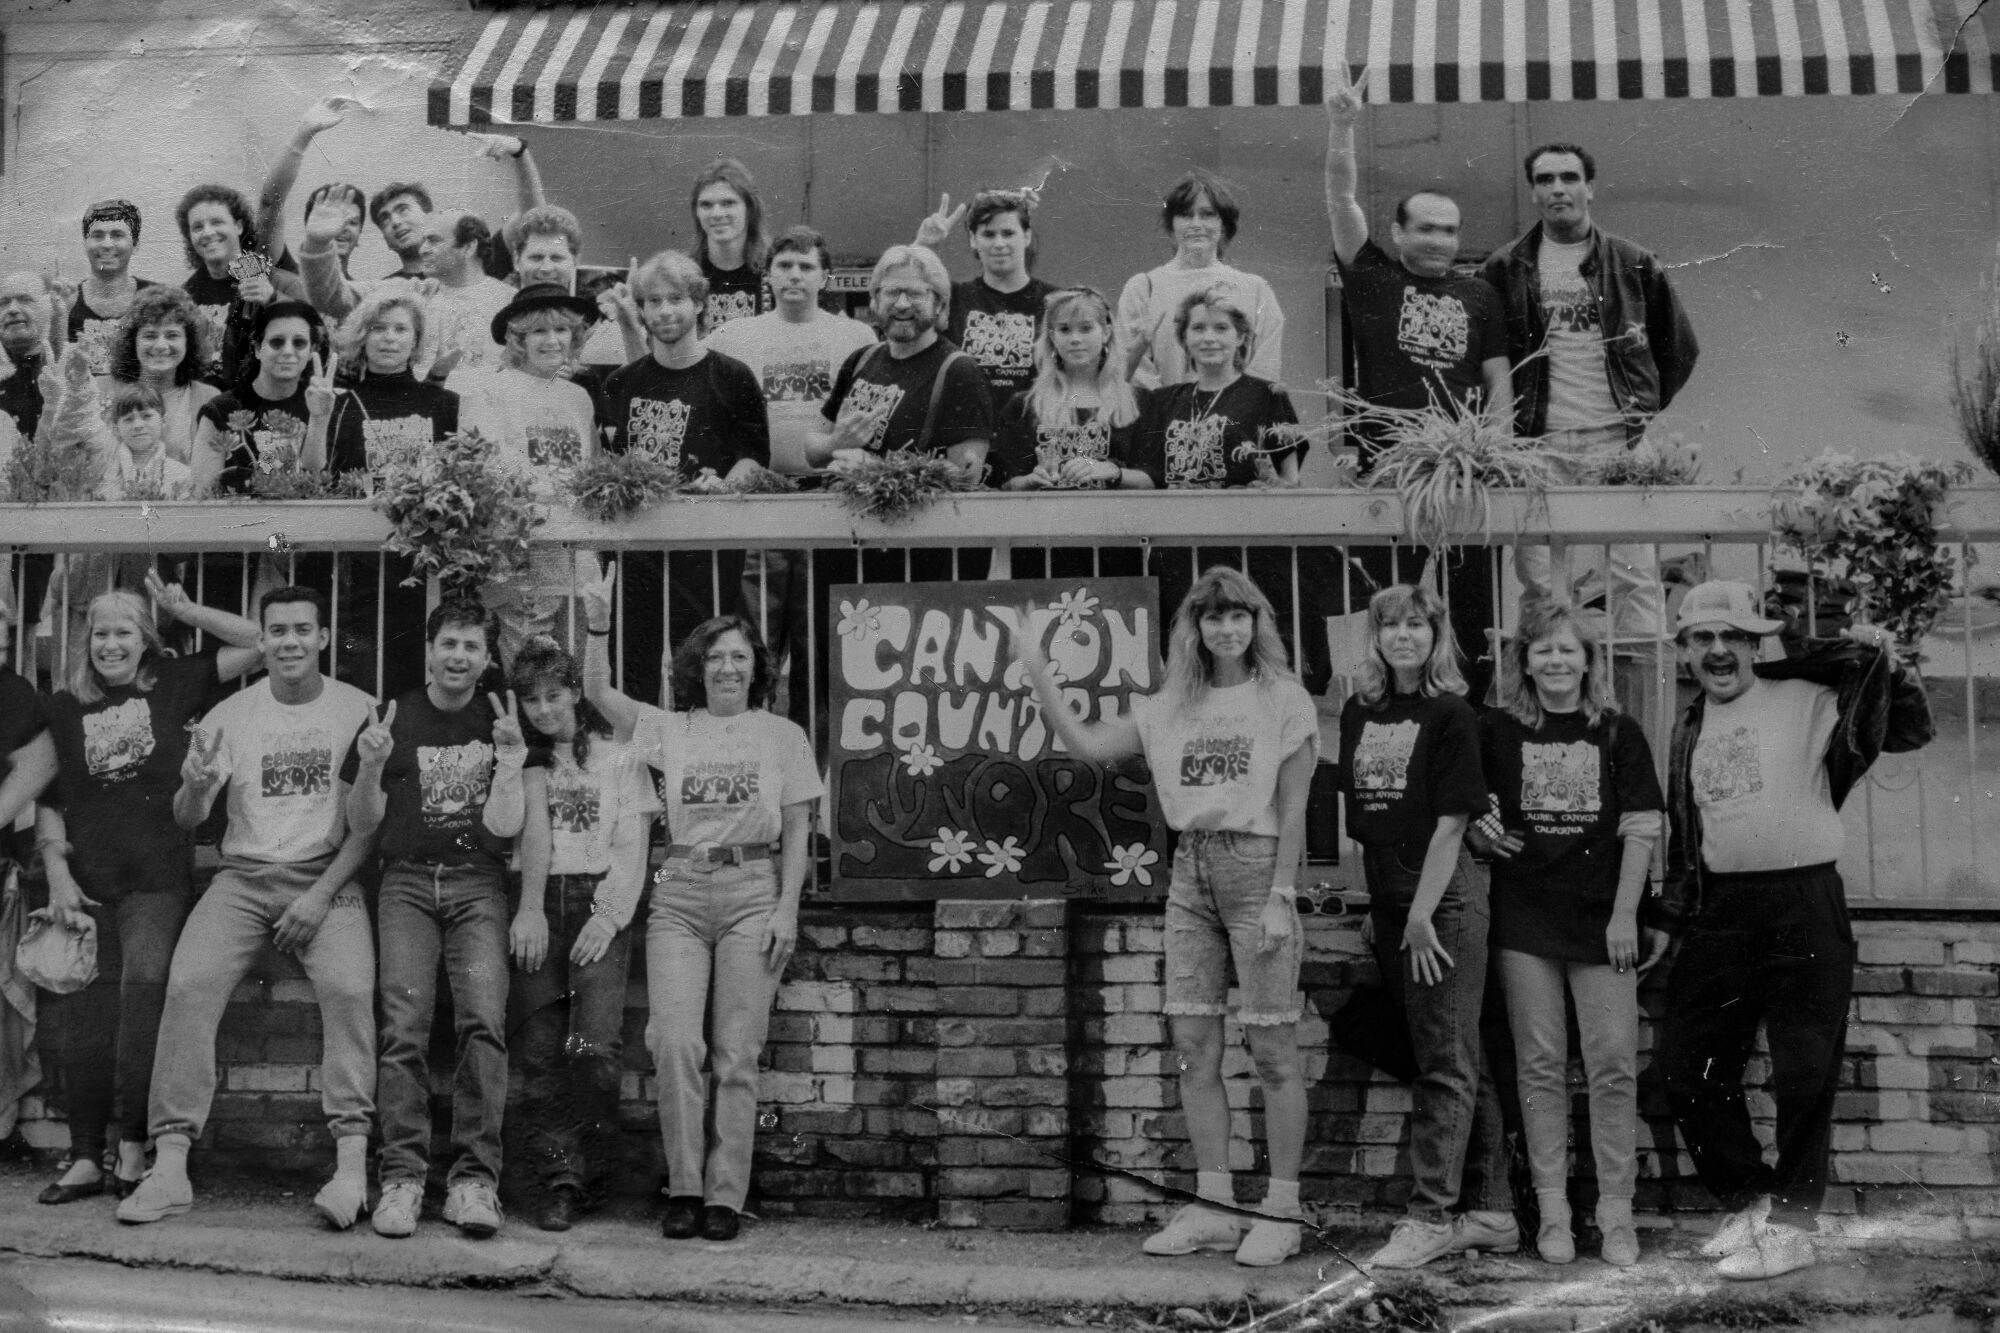 A black and white image of a neighborhood group shot in front of the Canyon Country store.